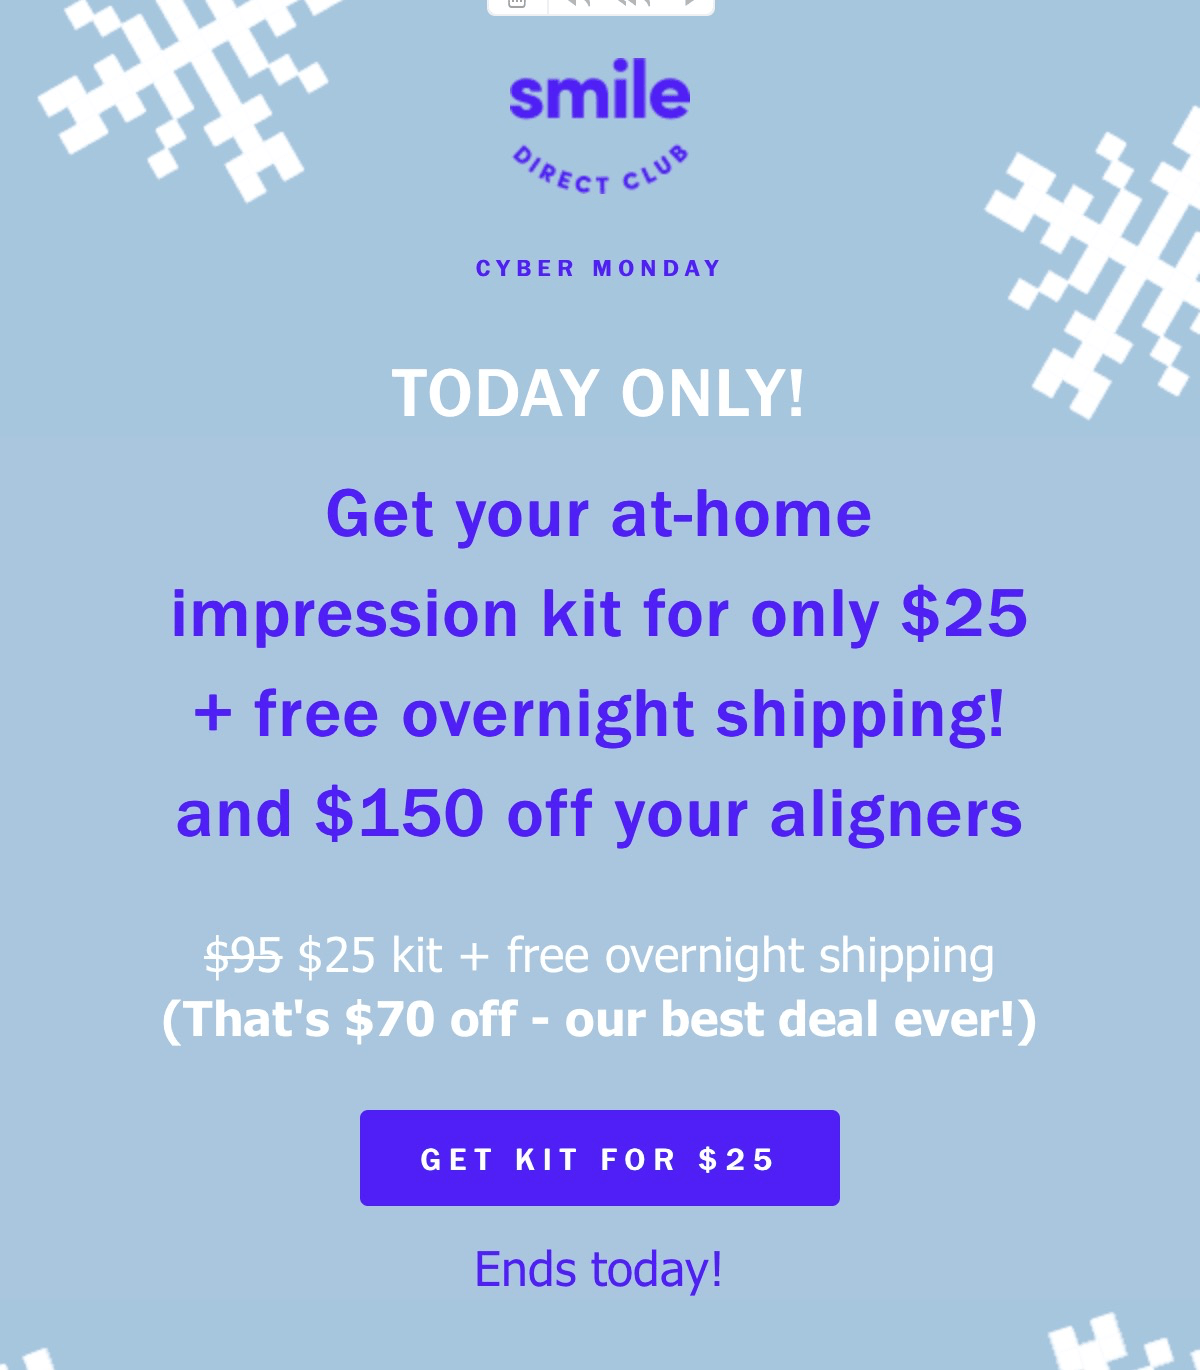 Smile Direct Club Cyber Monday Coupon Impression Kit 35 Shipped